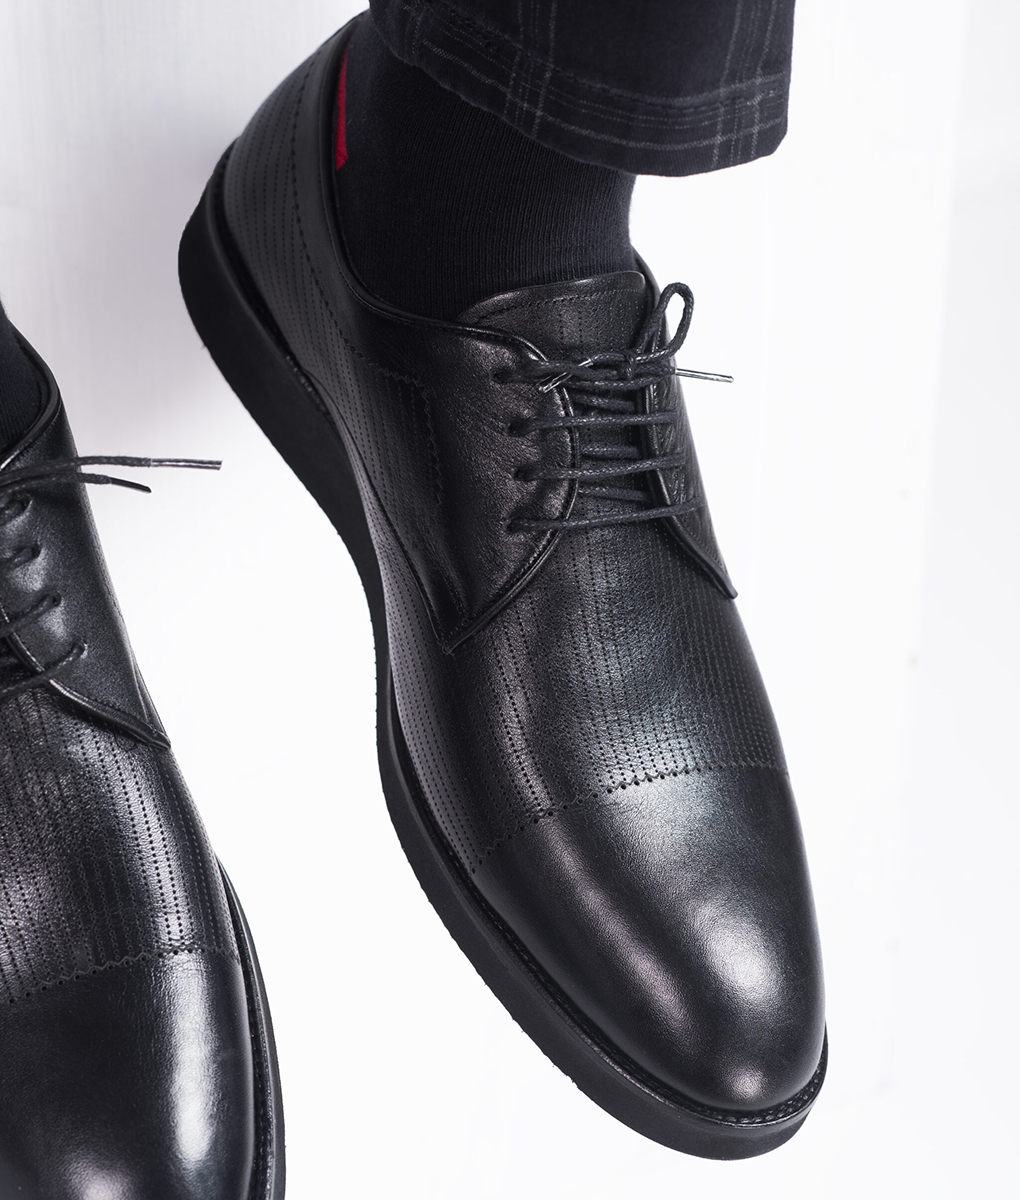 Bold Black Turkish Made Real Leather Shoes for Men